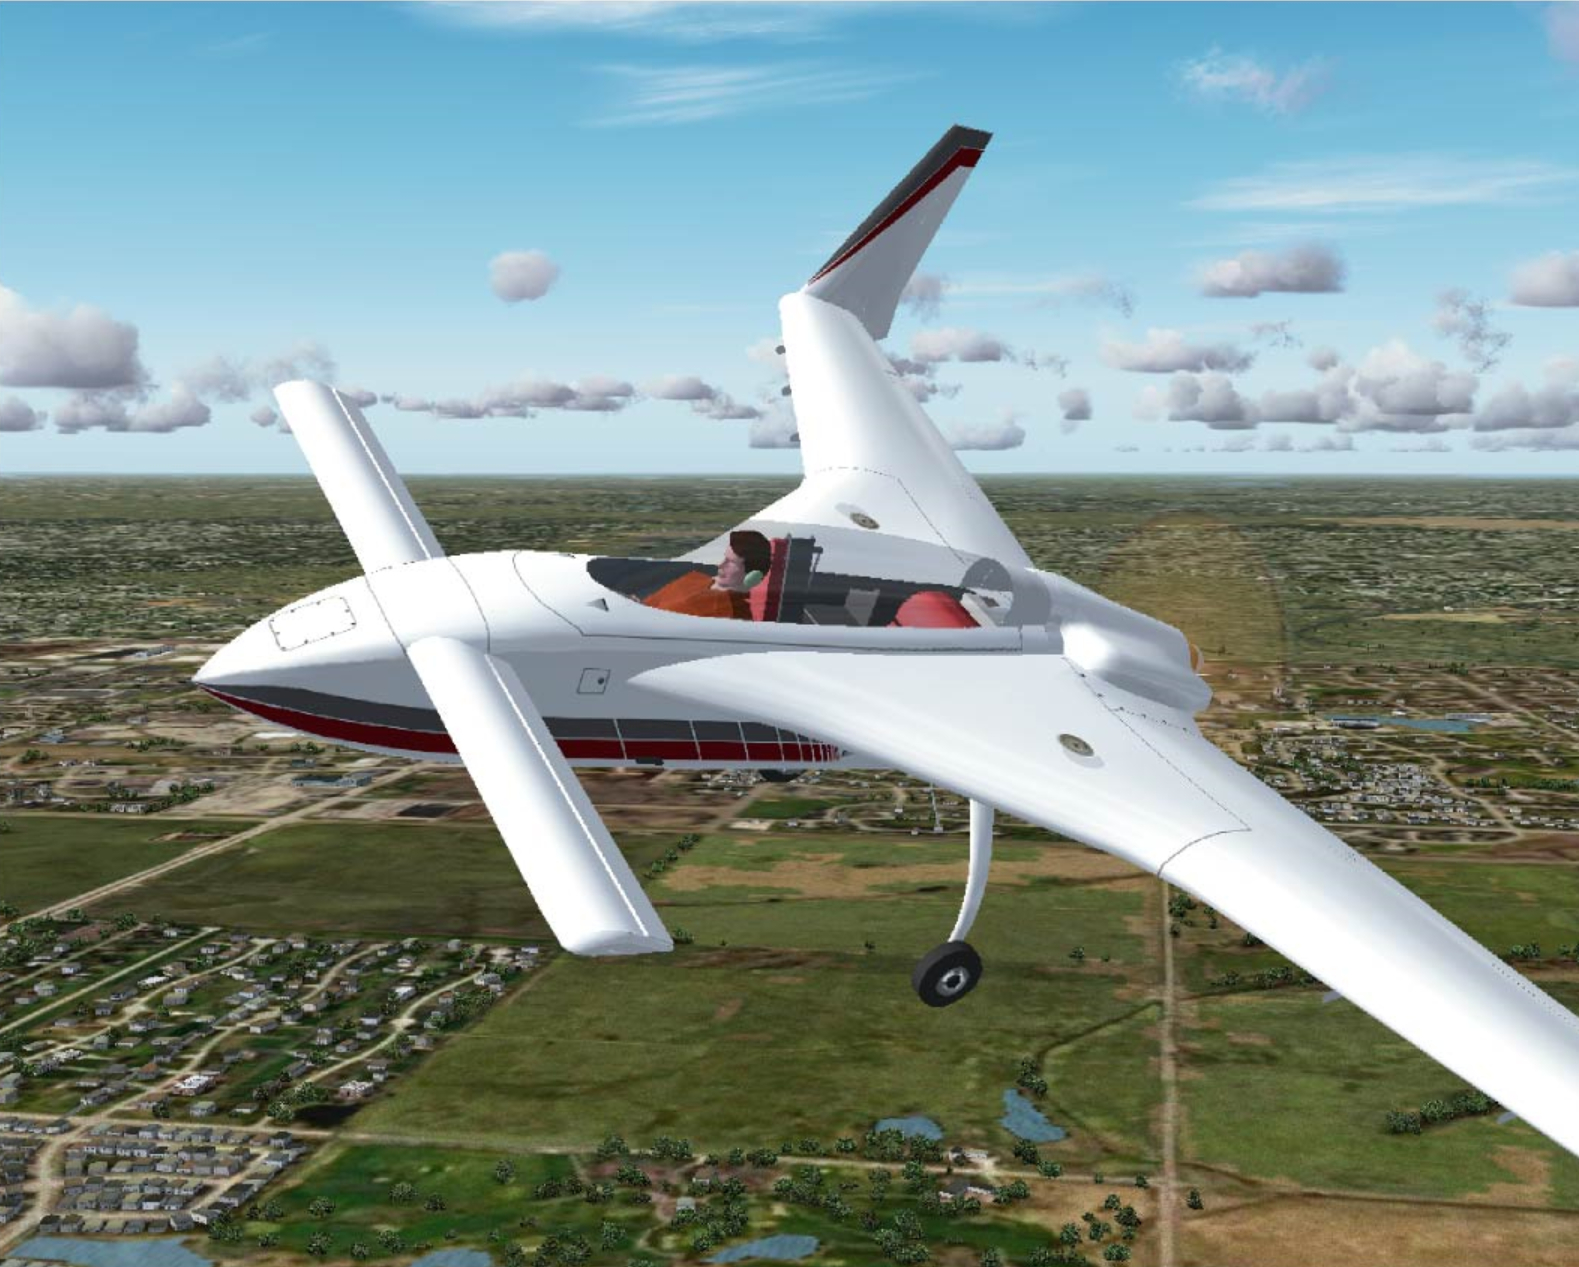 Long-EZ released by Indiafoxtecho - #19 by BostonJeremy77 - Aircraft -  Microsoft Flight Simulator Forums